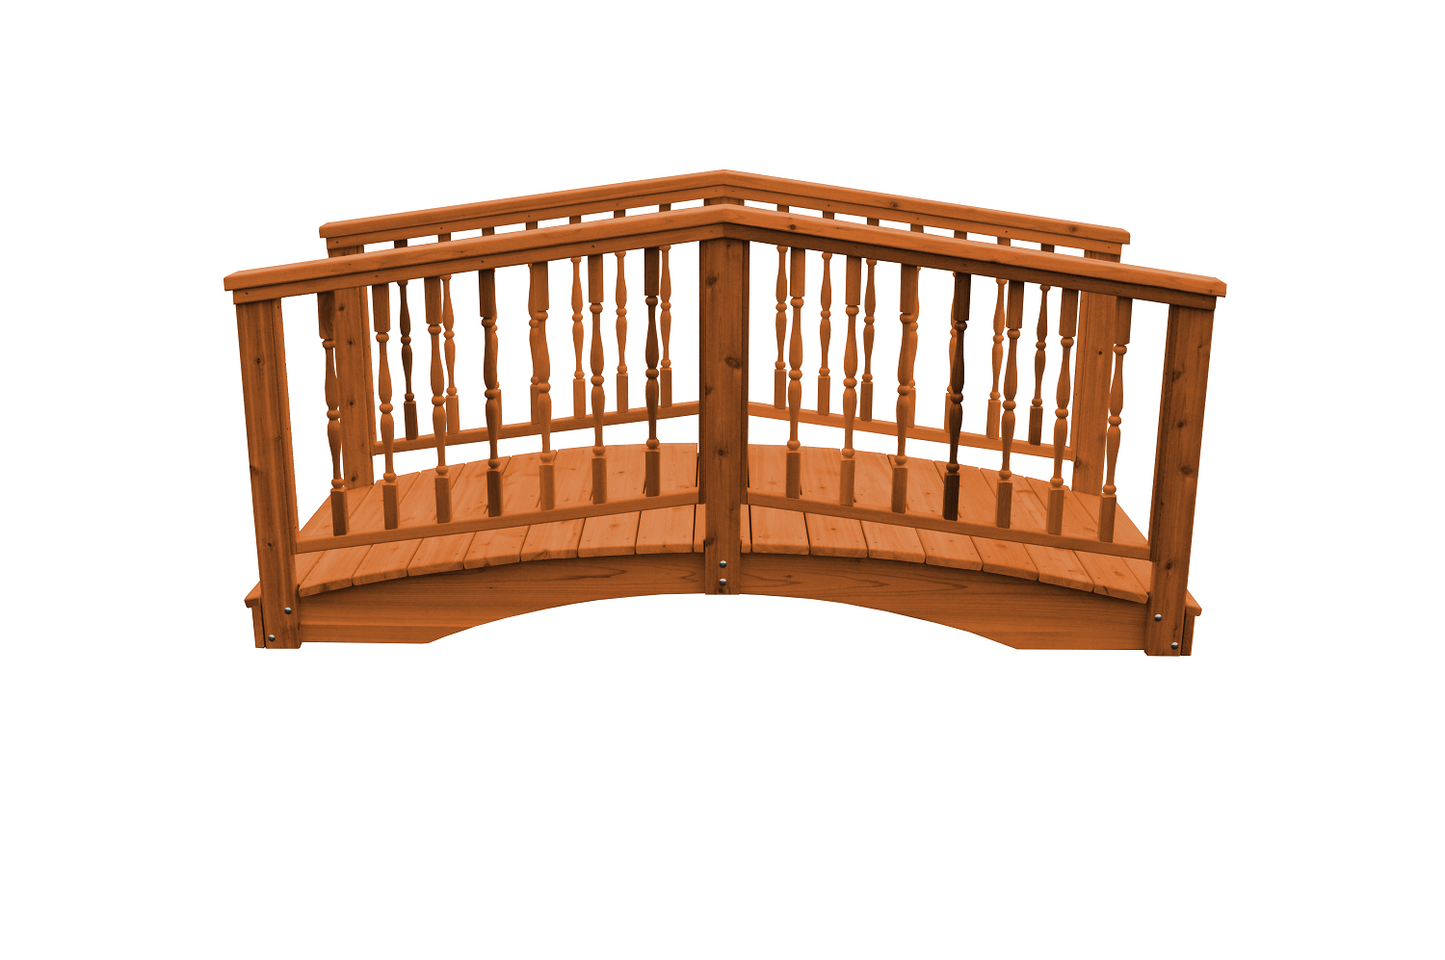 A&L Furniture Co. Western Red Cedar 3' x 8' Spindle Bridge - LEAD TIME TO SHIP 4 WEEKS OR LESS